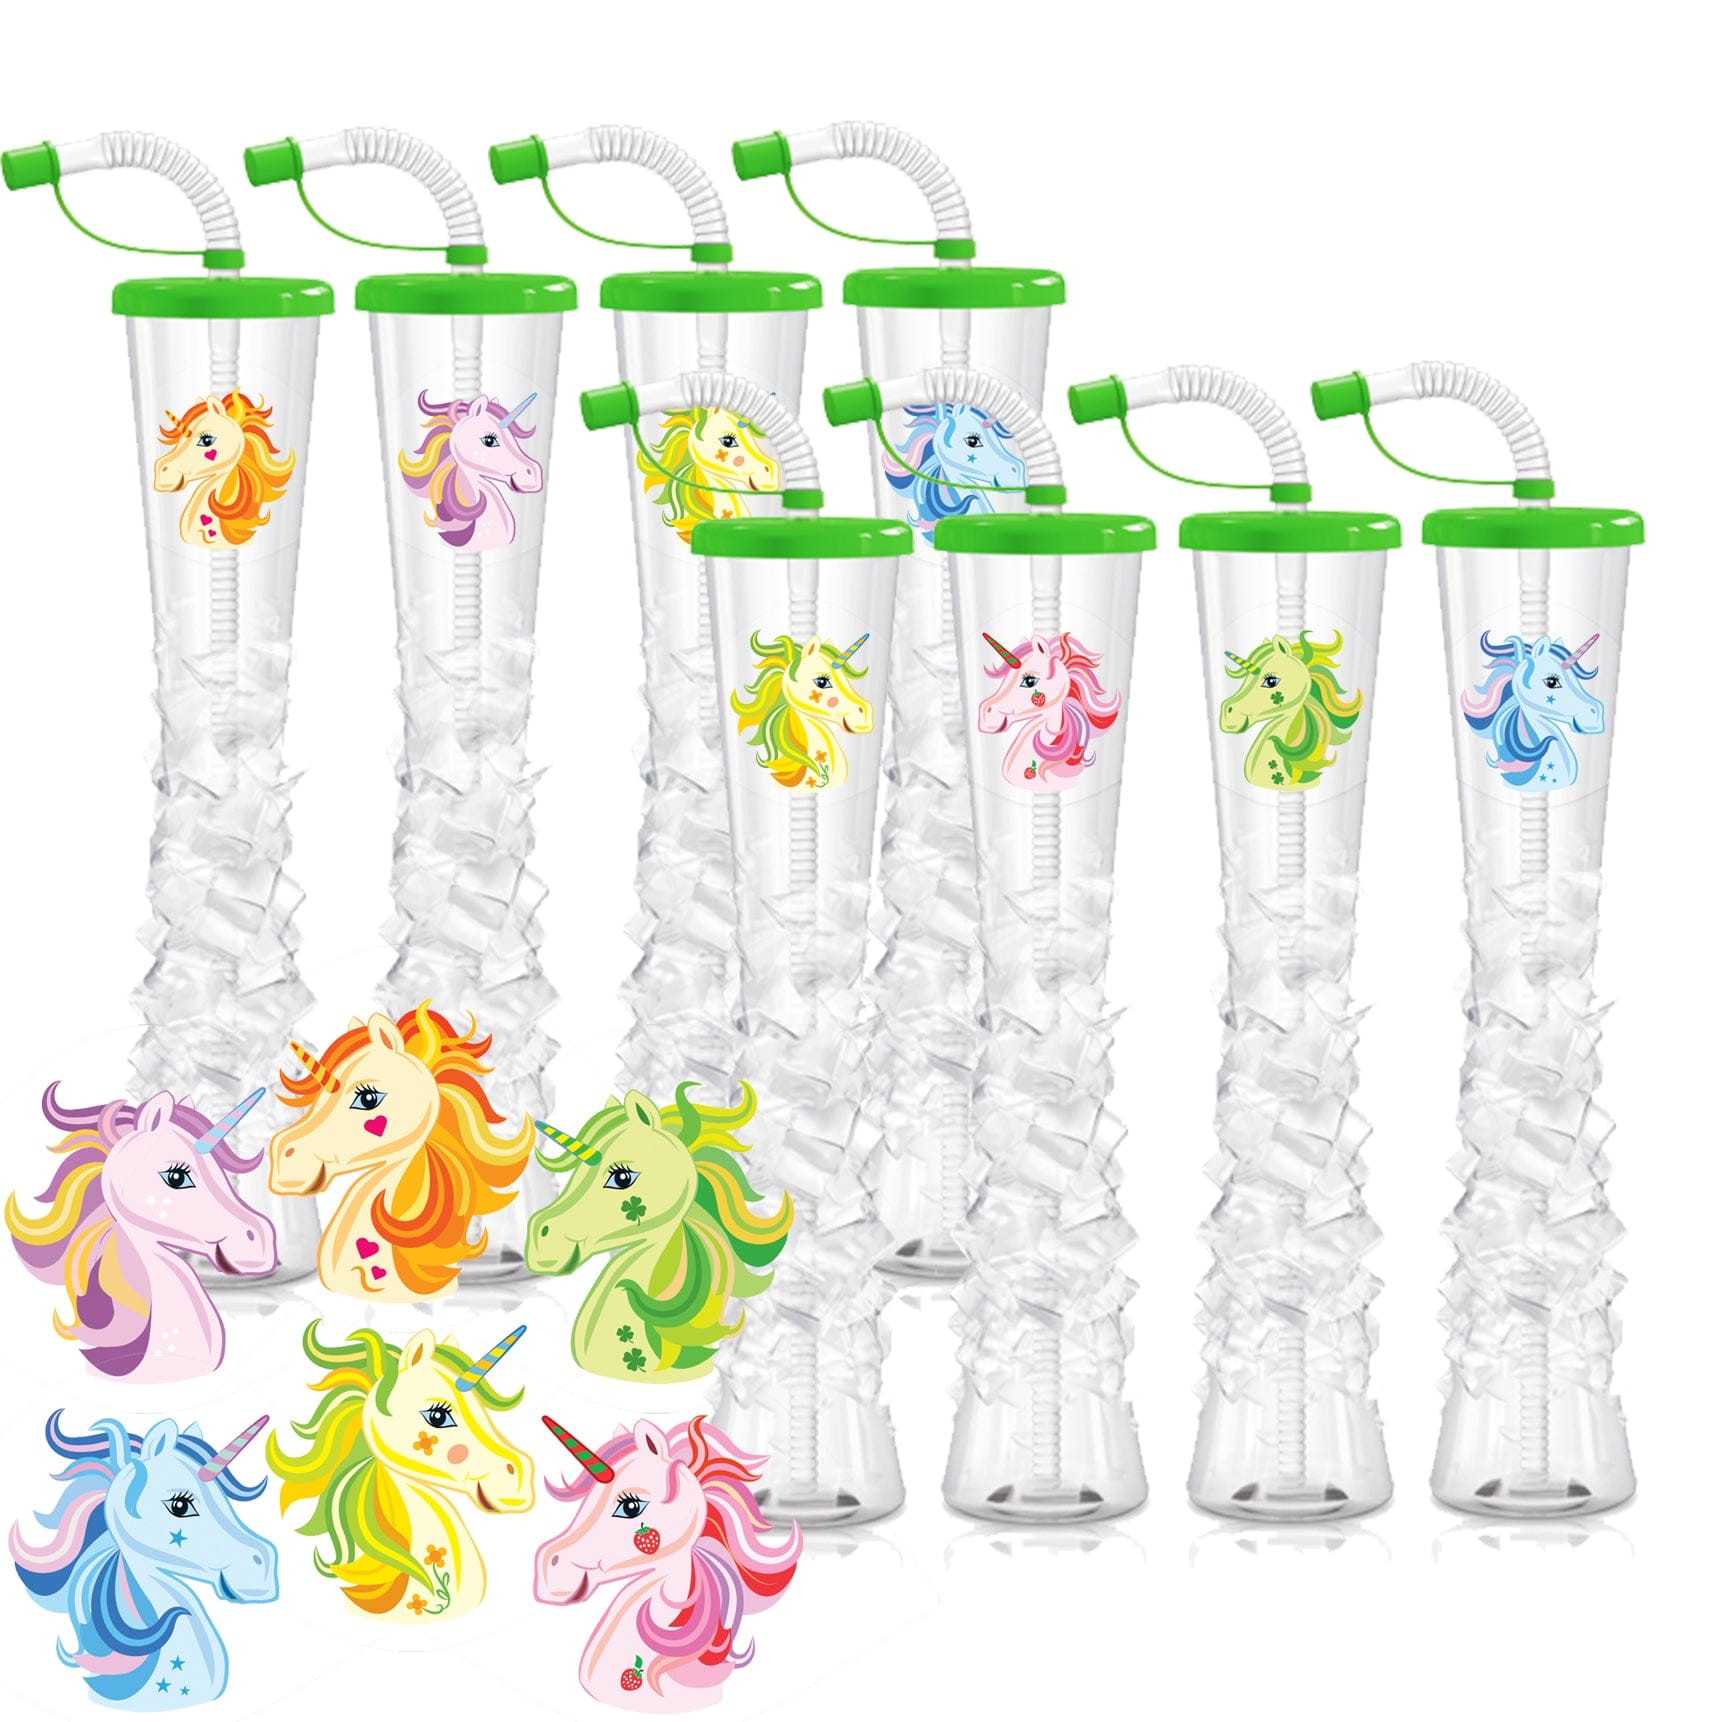 Sweet World USA Yard Cups Lime Green with Unicorn Unicorn Ice Yard Cups (54 Cups) - for Margaritas and Frozen Drinks, Kids Parties - 17oz. (500ml) cups with lids and straws